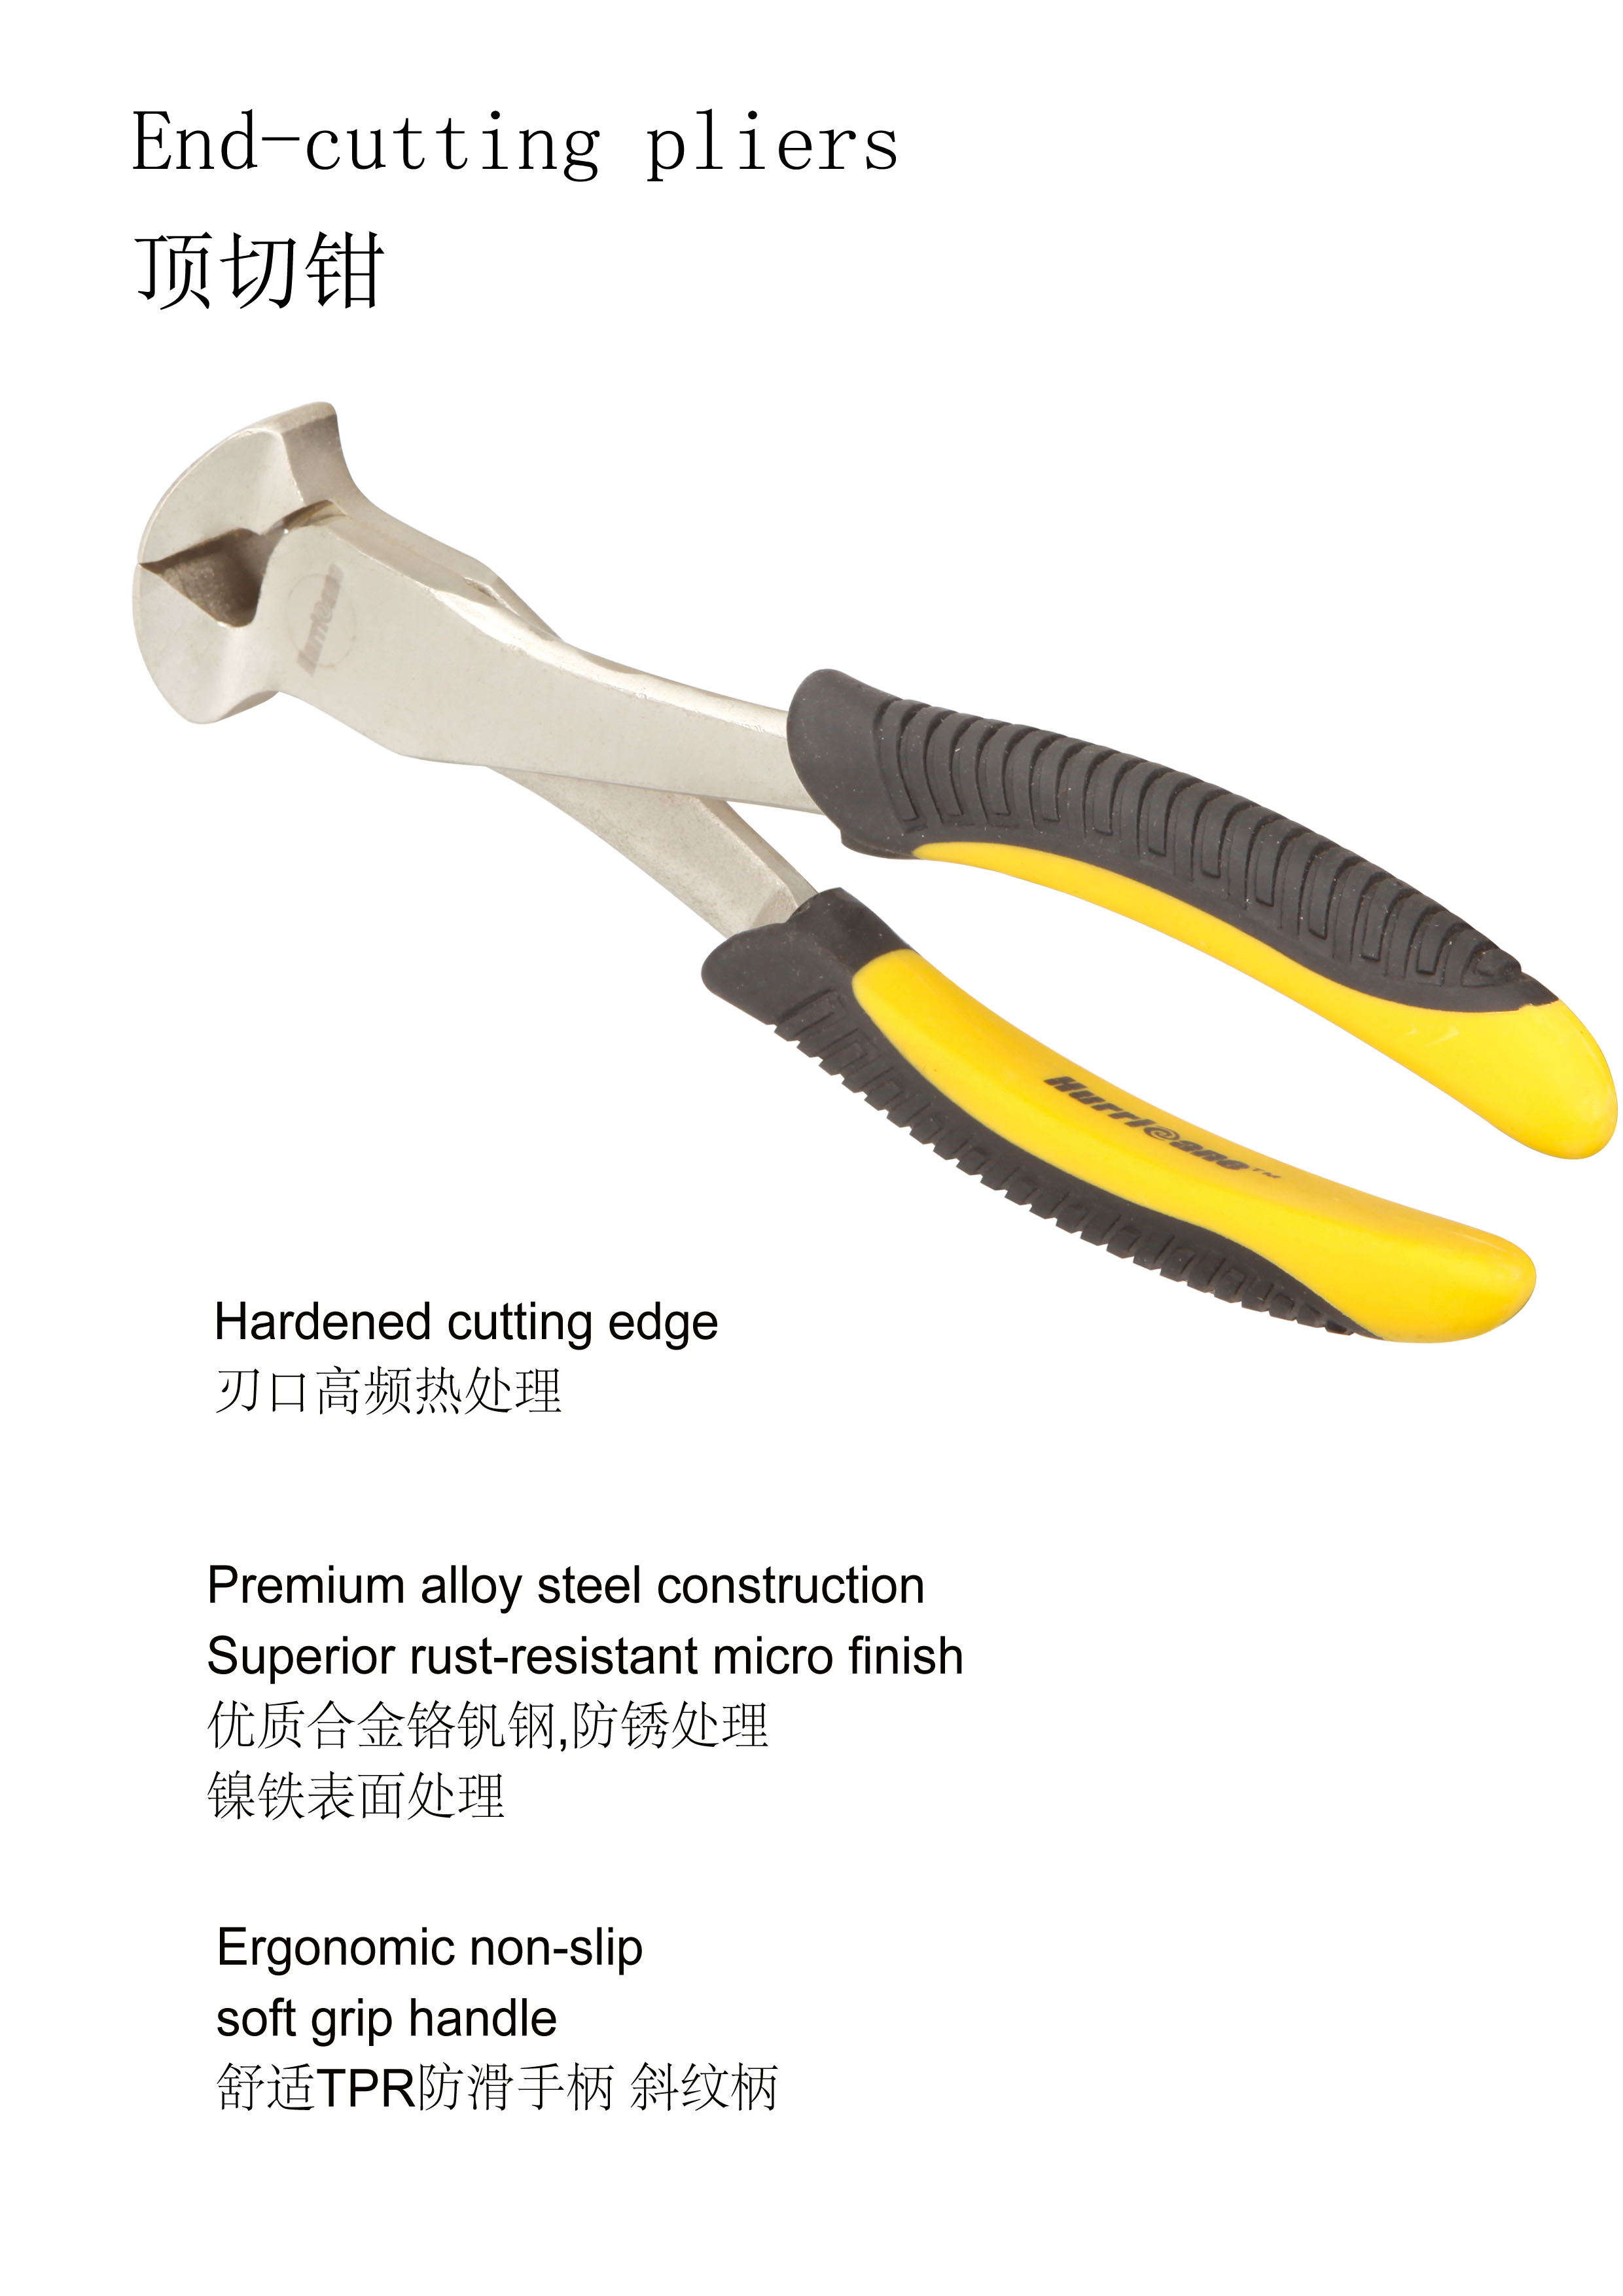 End-cutting pliers